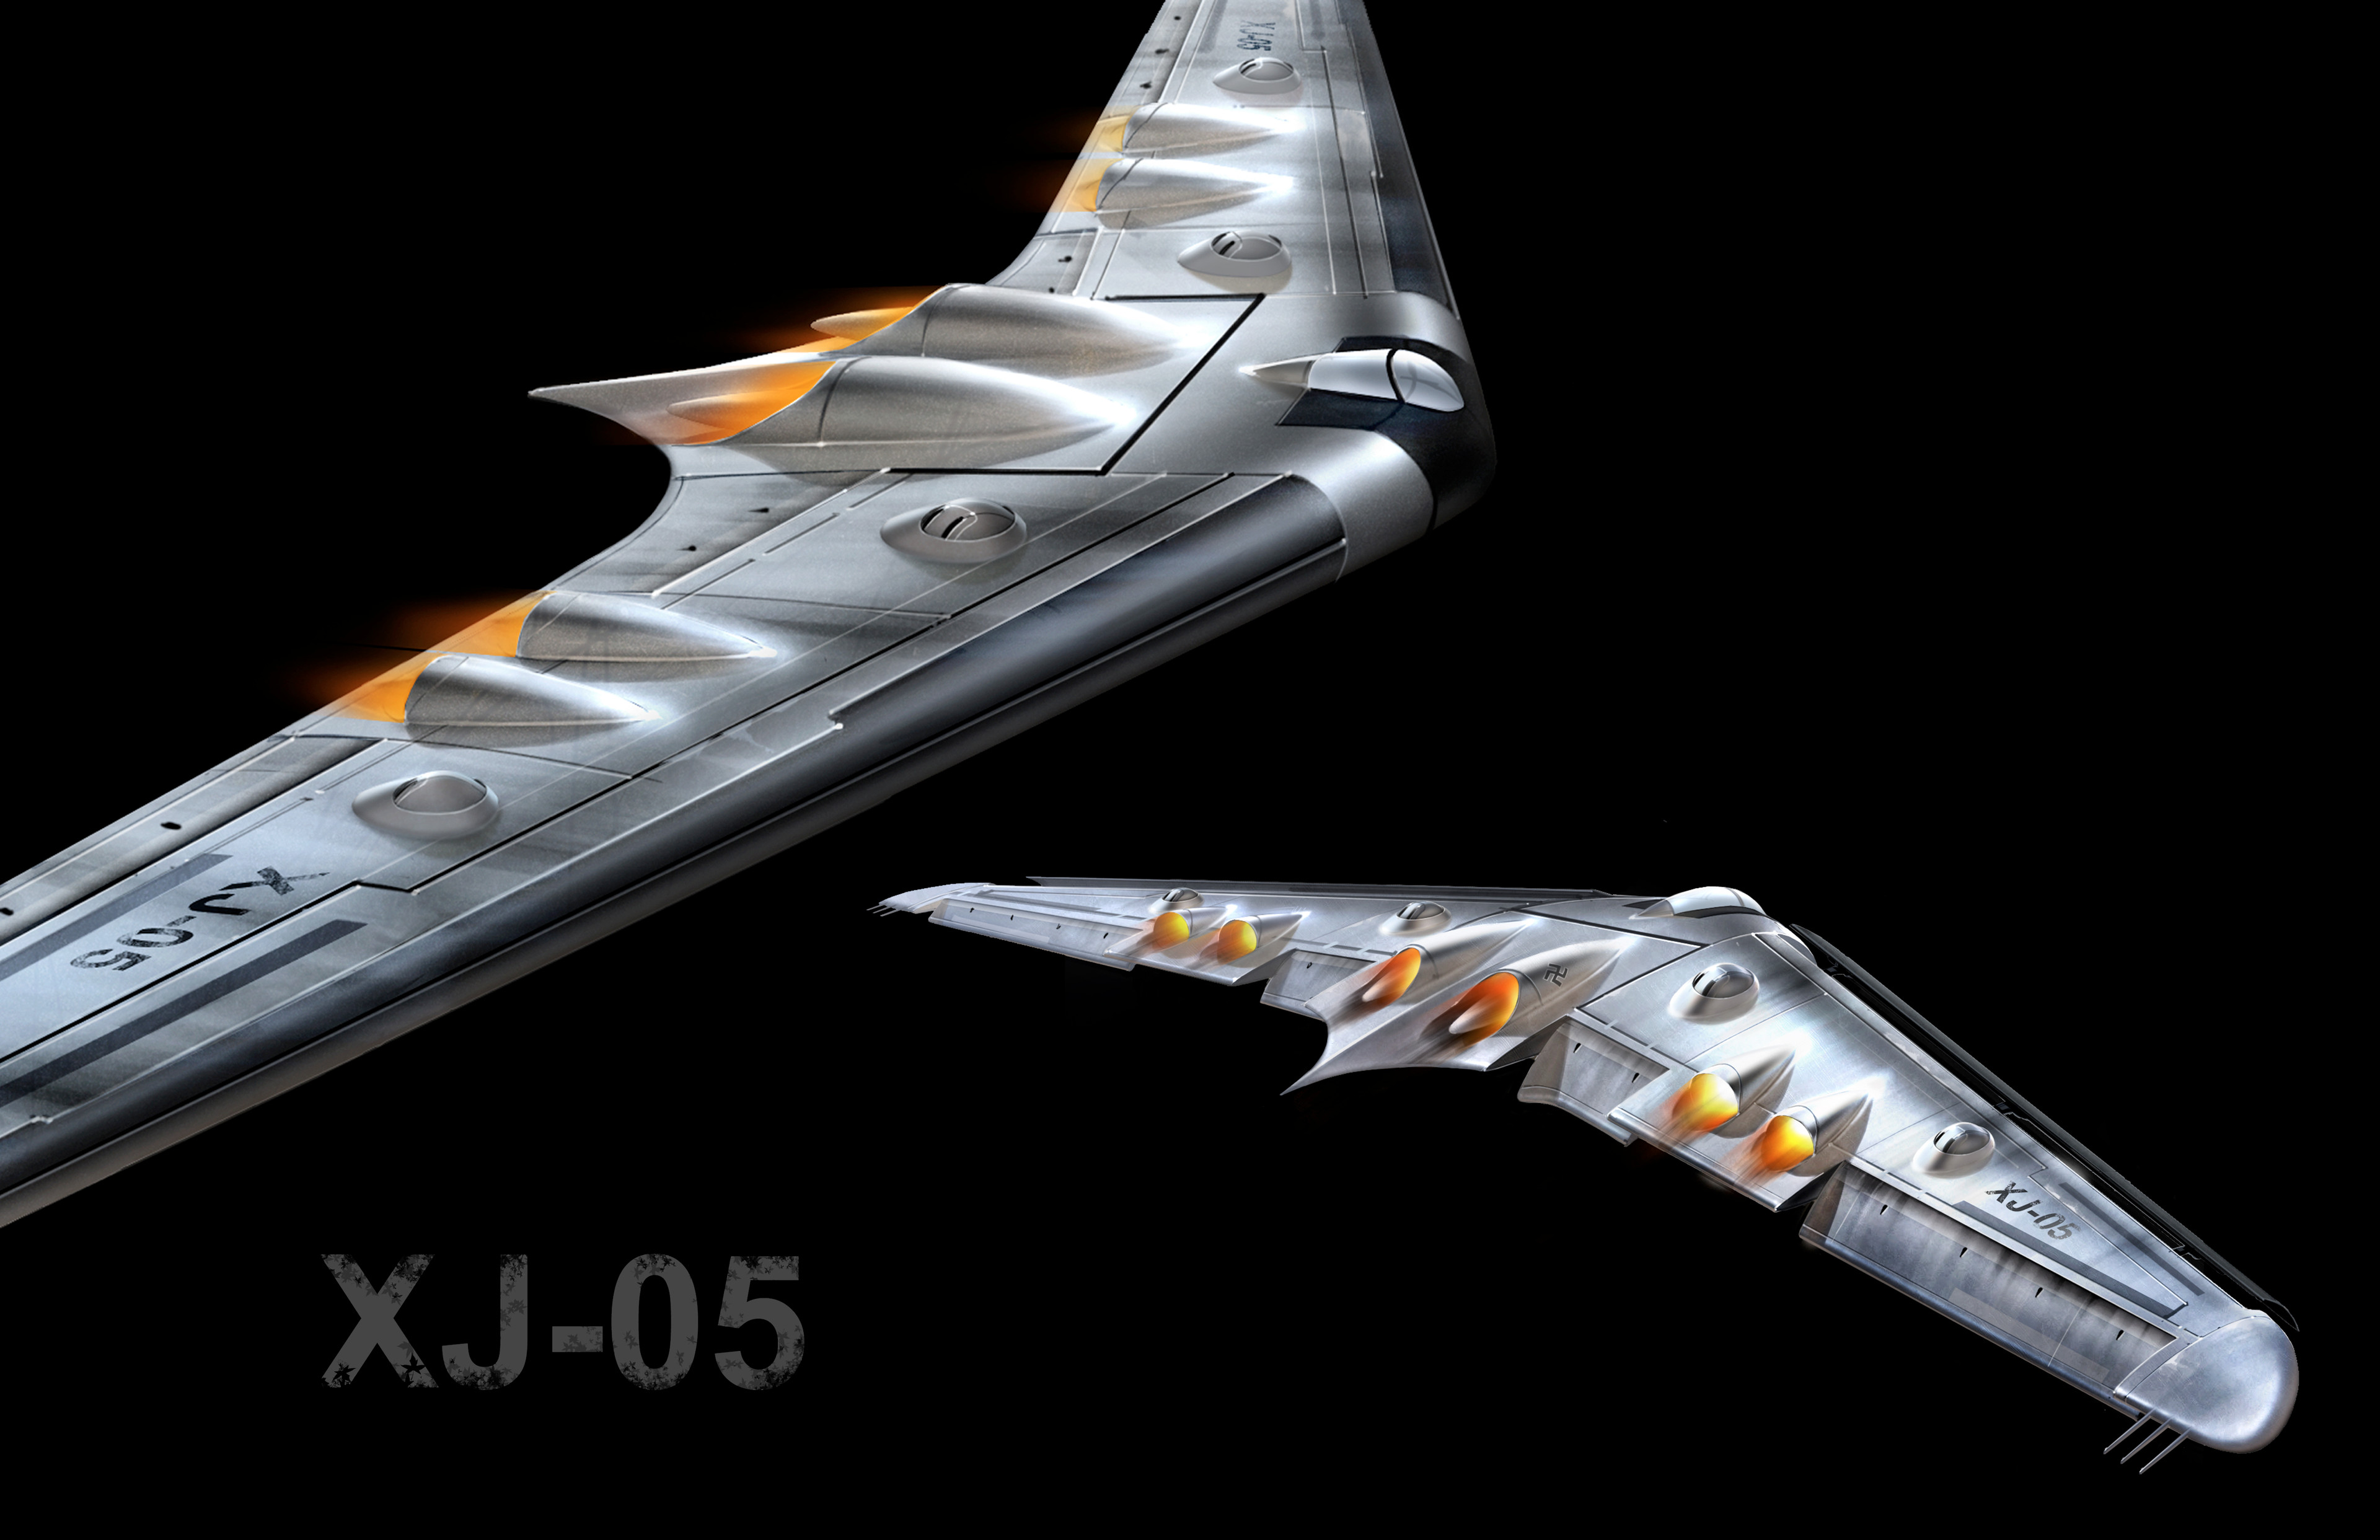 The Experimental Jet version 5 is a traditional looking flying wing with jet engine technology.  I added a number of manned gunner balls for the purpose of having to fight it as a boss encounter.